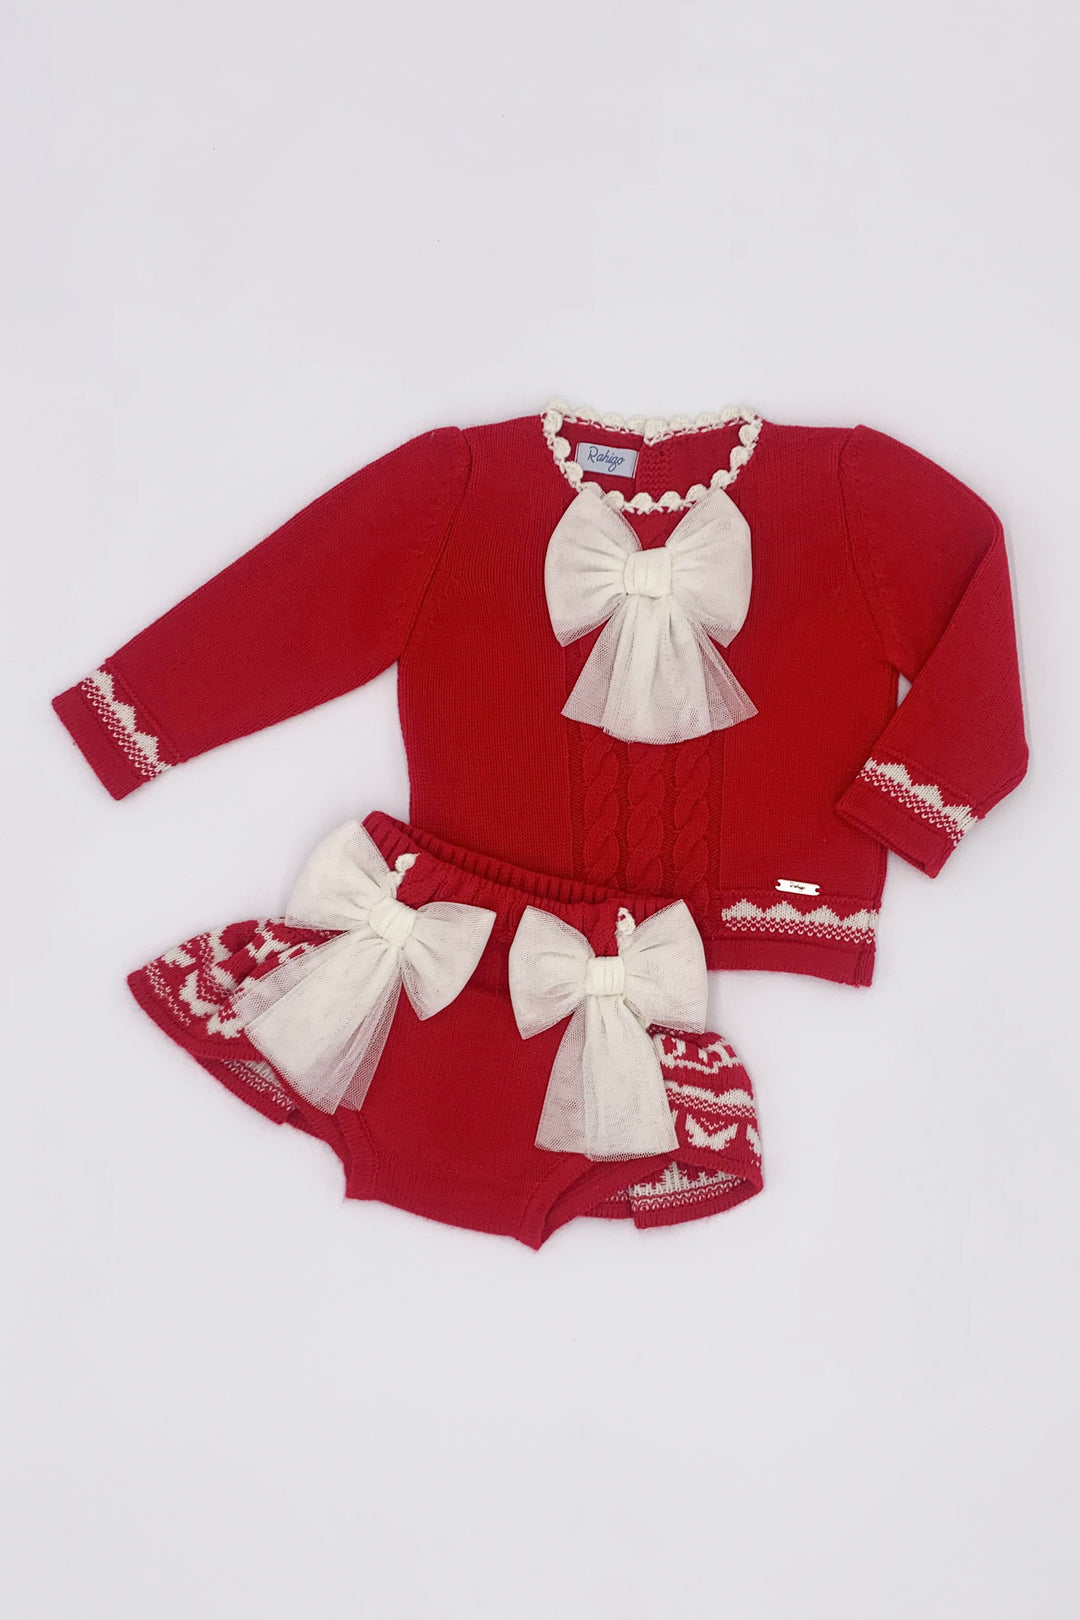 Rahigo PREORDER "Seraphina" Red Knit Top & Bloomers | Millie and John